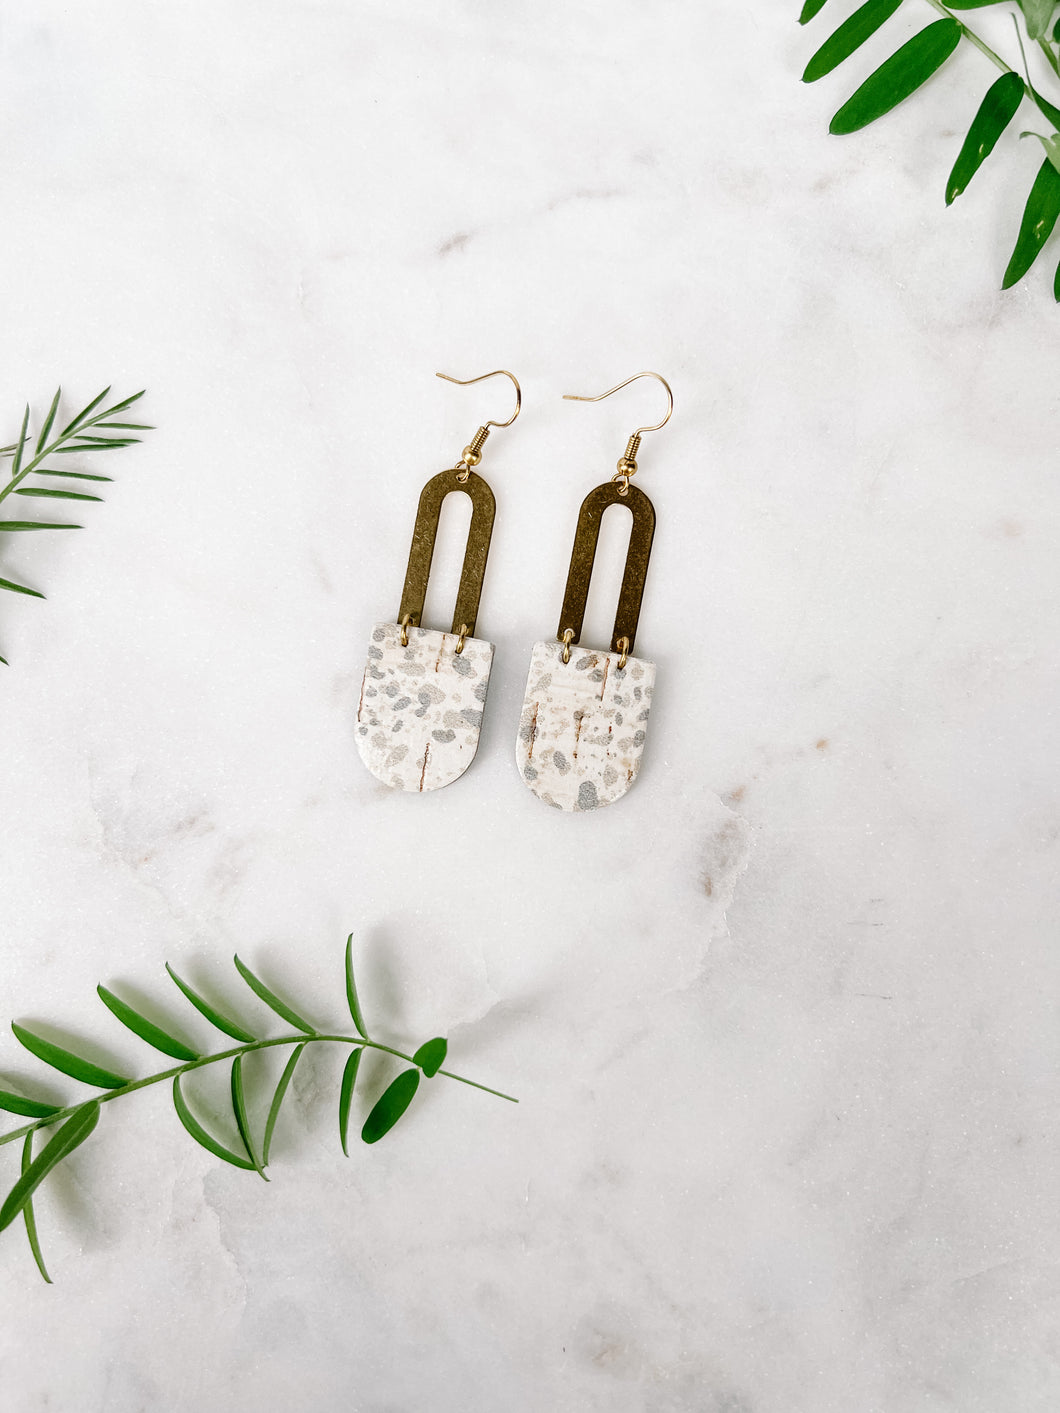 speckled white and grey leather earrings with a brass horseshoe accent